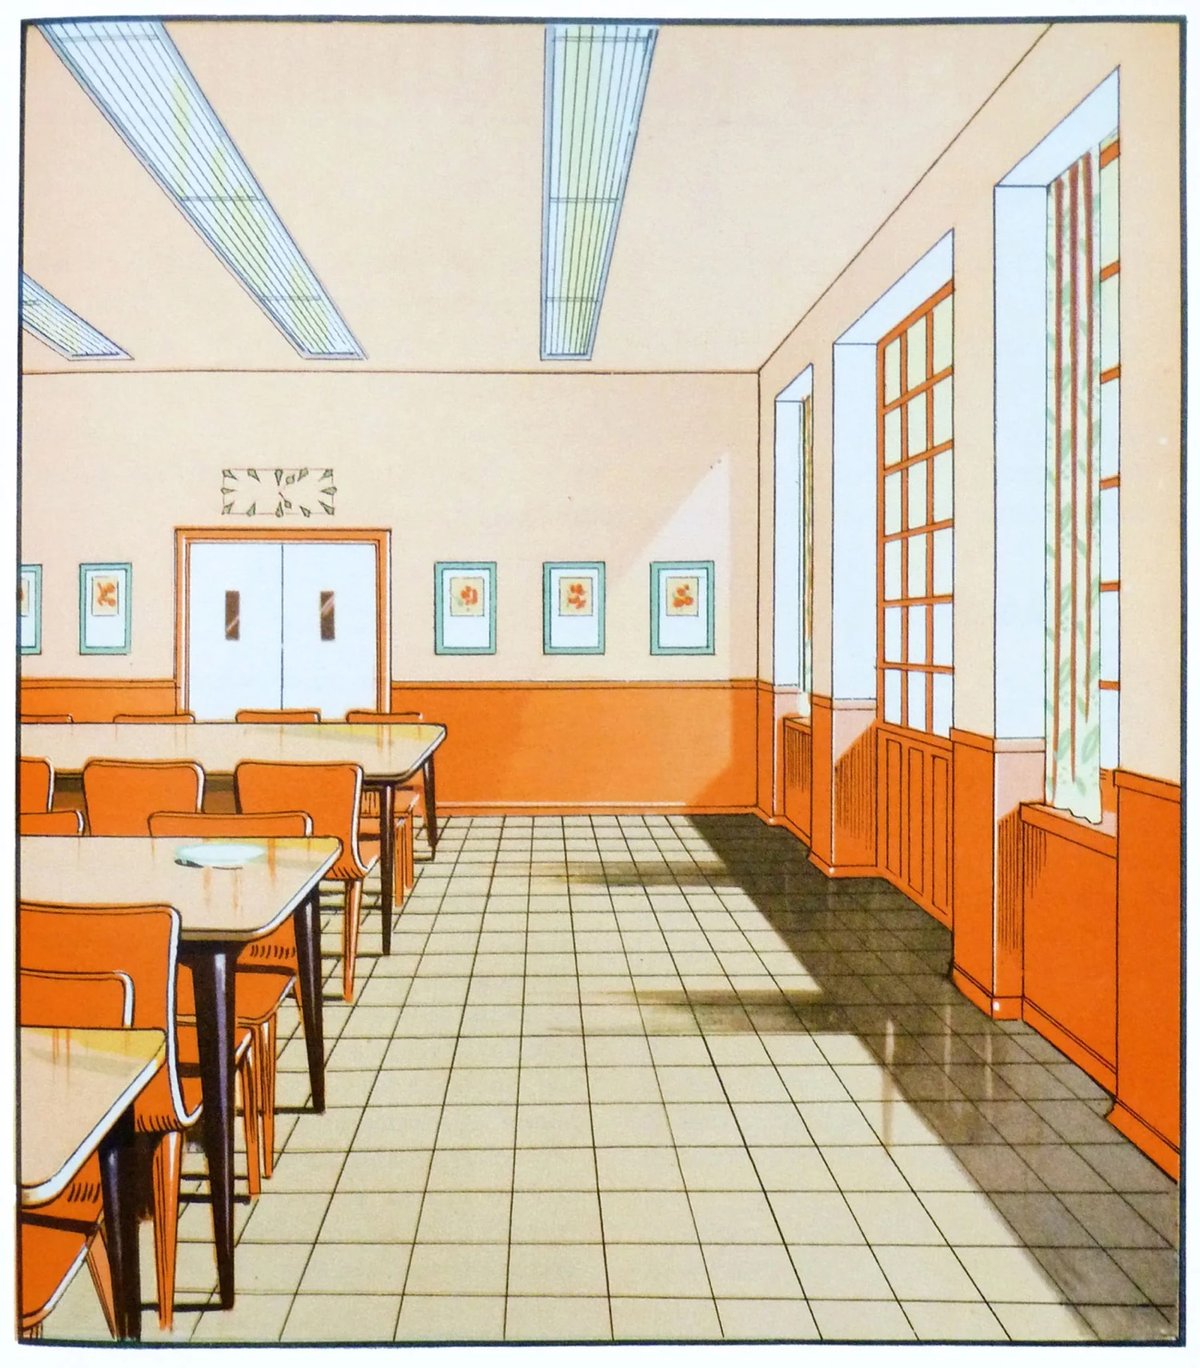 A warmly lit dining hall featuring wooden tables and chairs on a checkered floor, flanked by an orange wainscot and decorated with framed artwork.